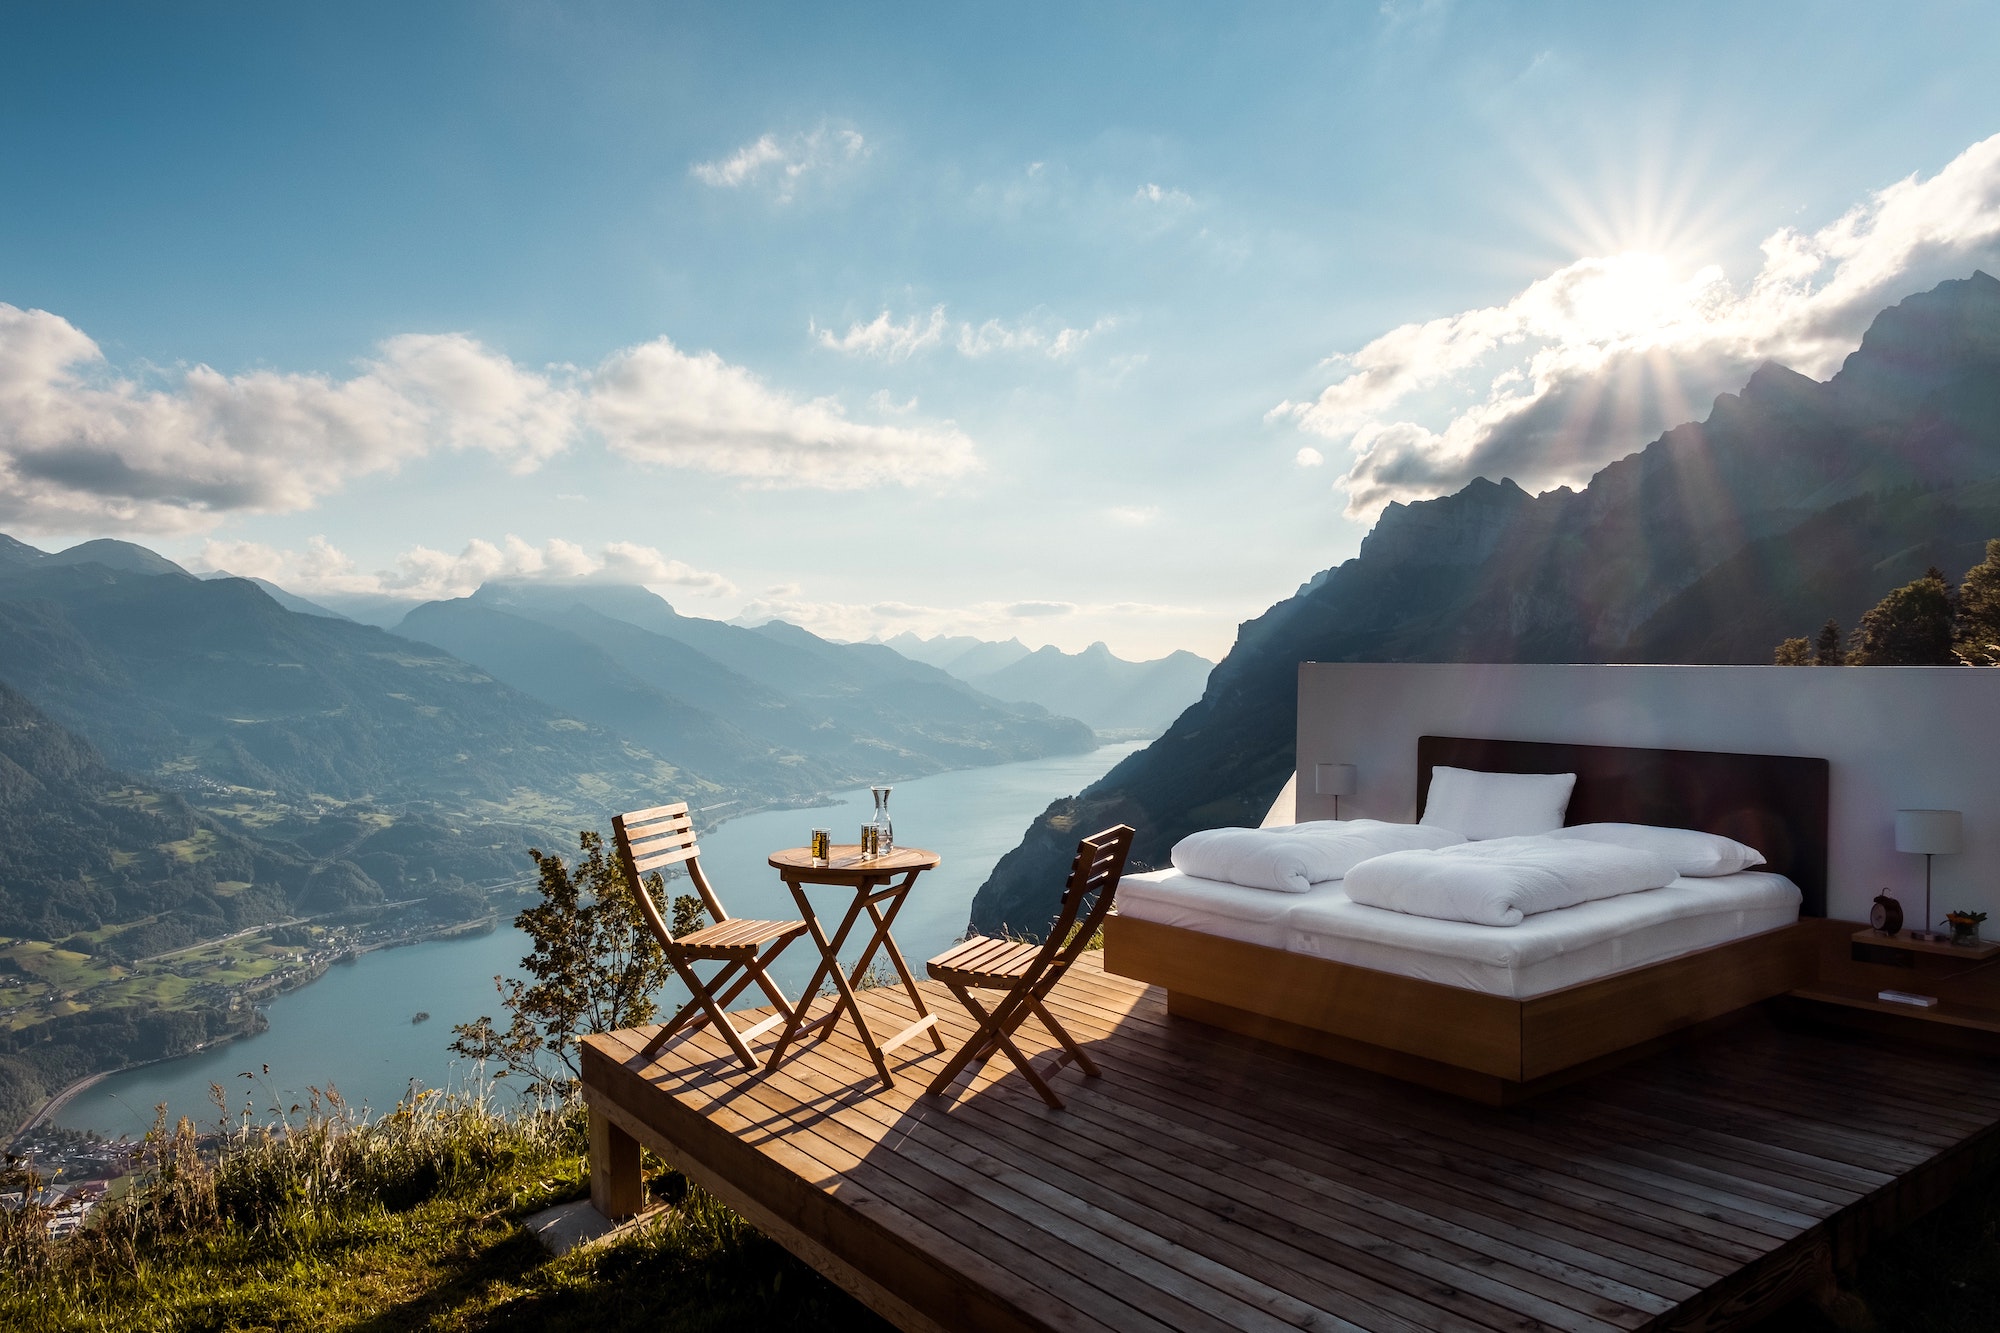 Here are the top hospitality trends to look out for in 2019